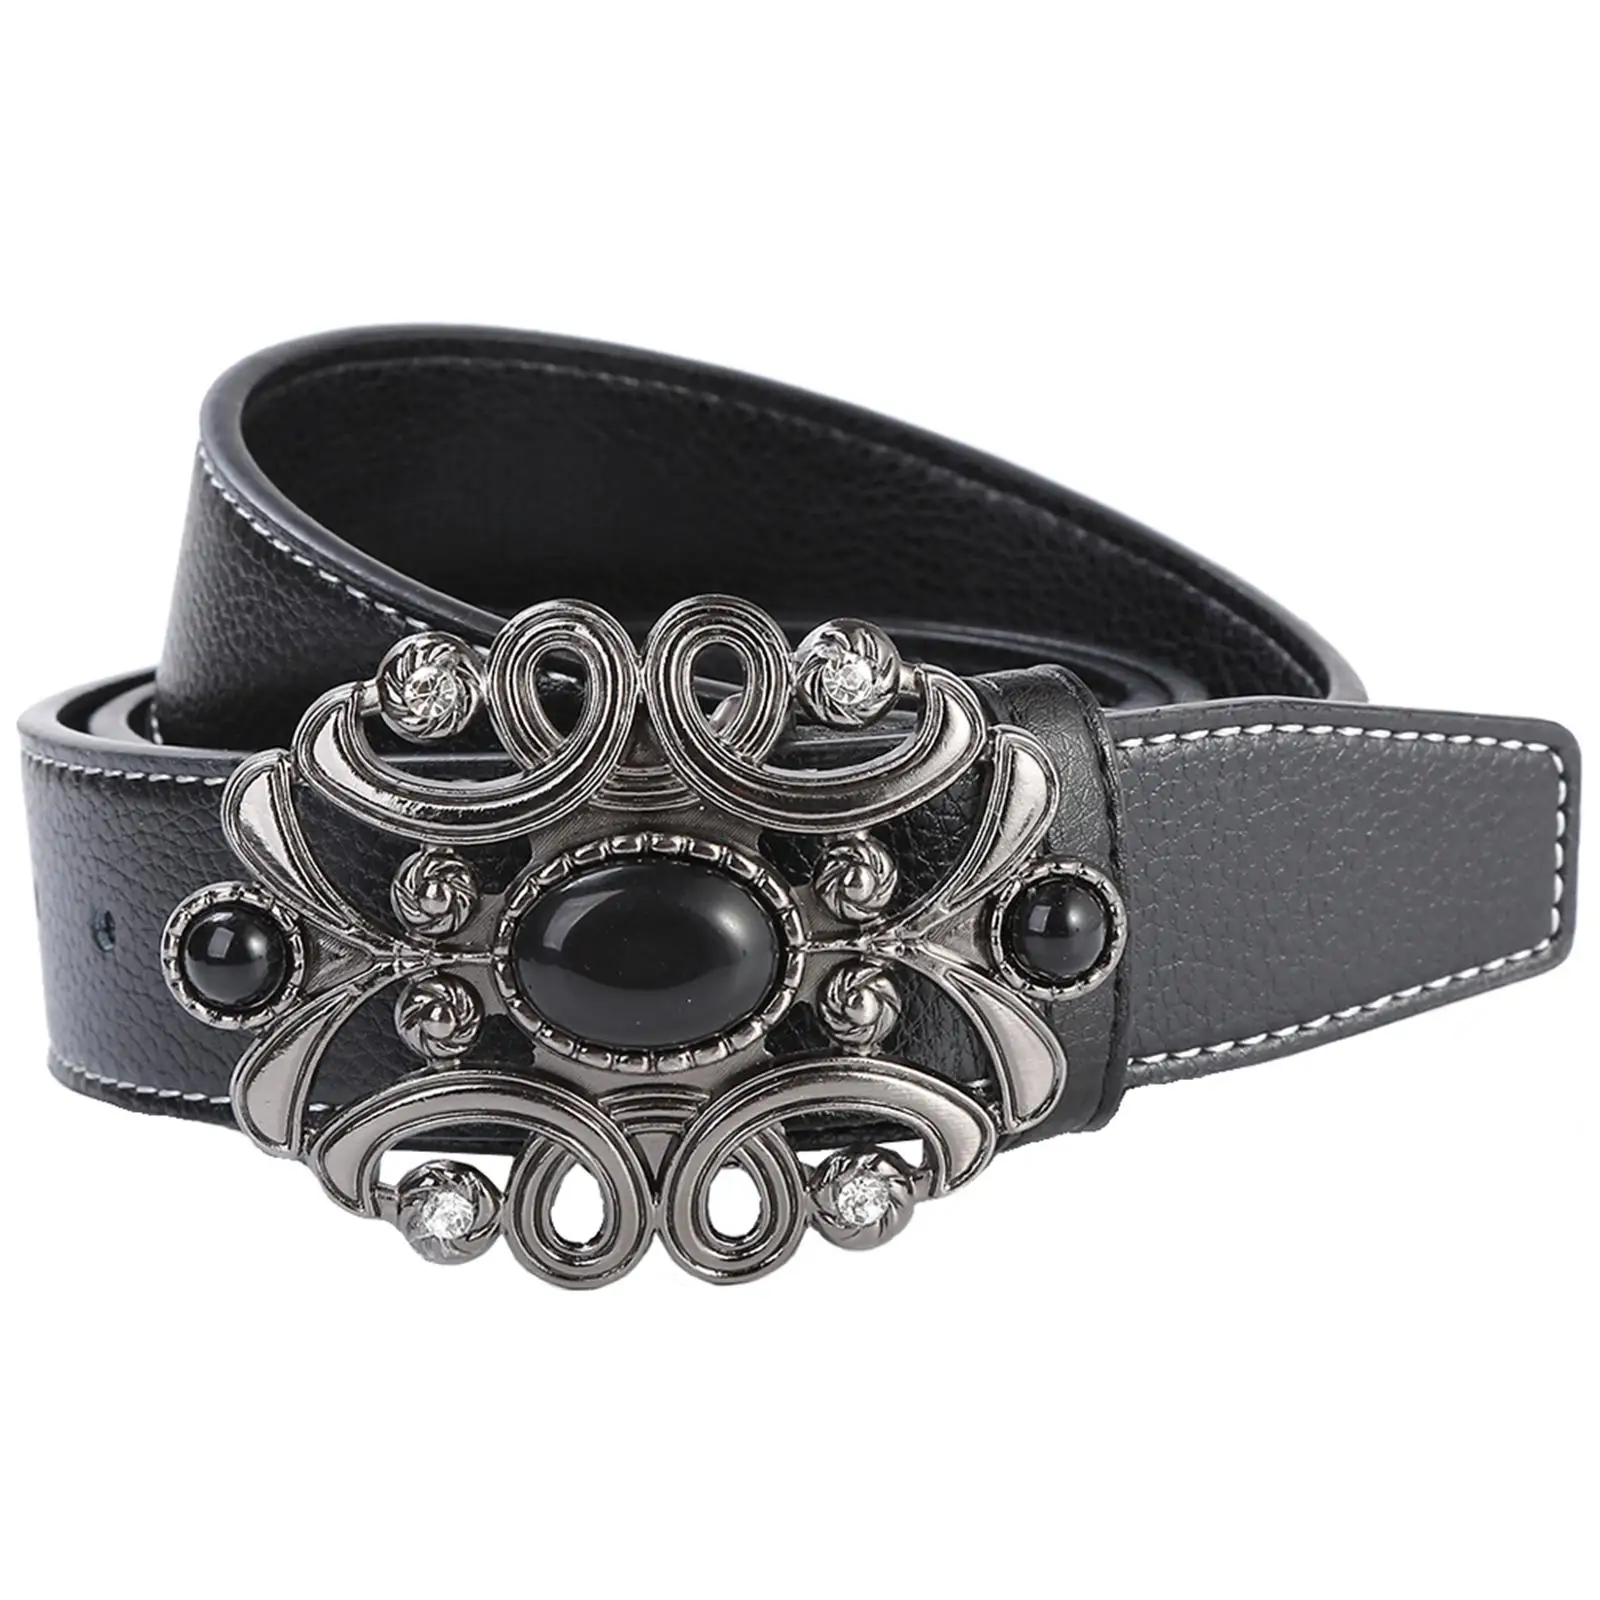 Retro Style Western Belt with Buckle Mens Leather Belt for Birthday Gifts